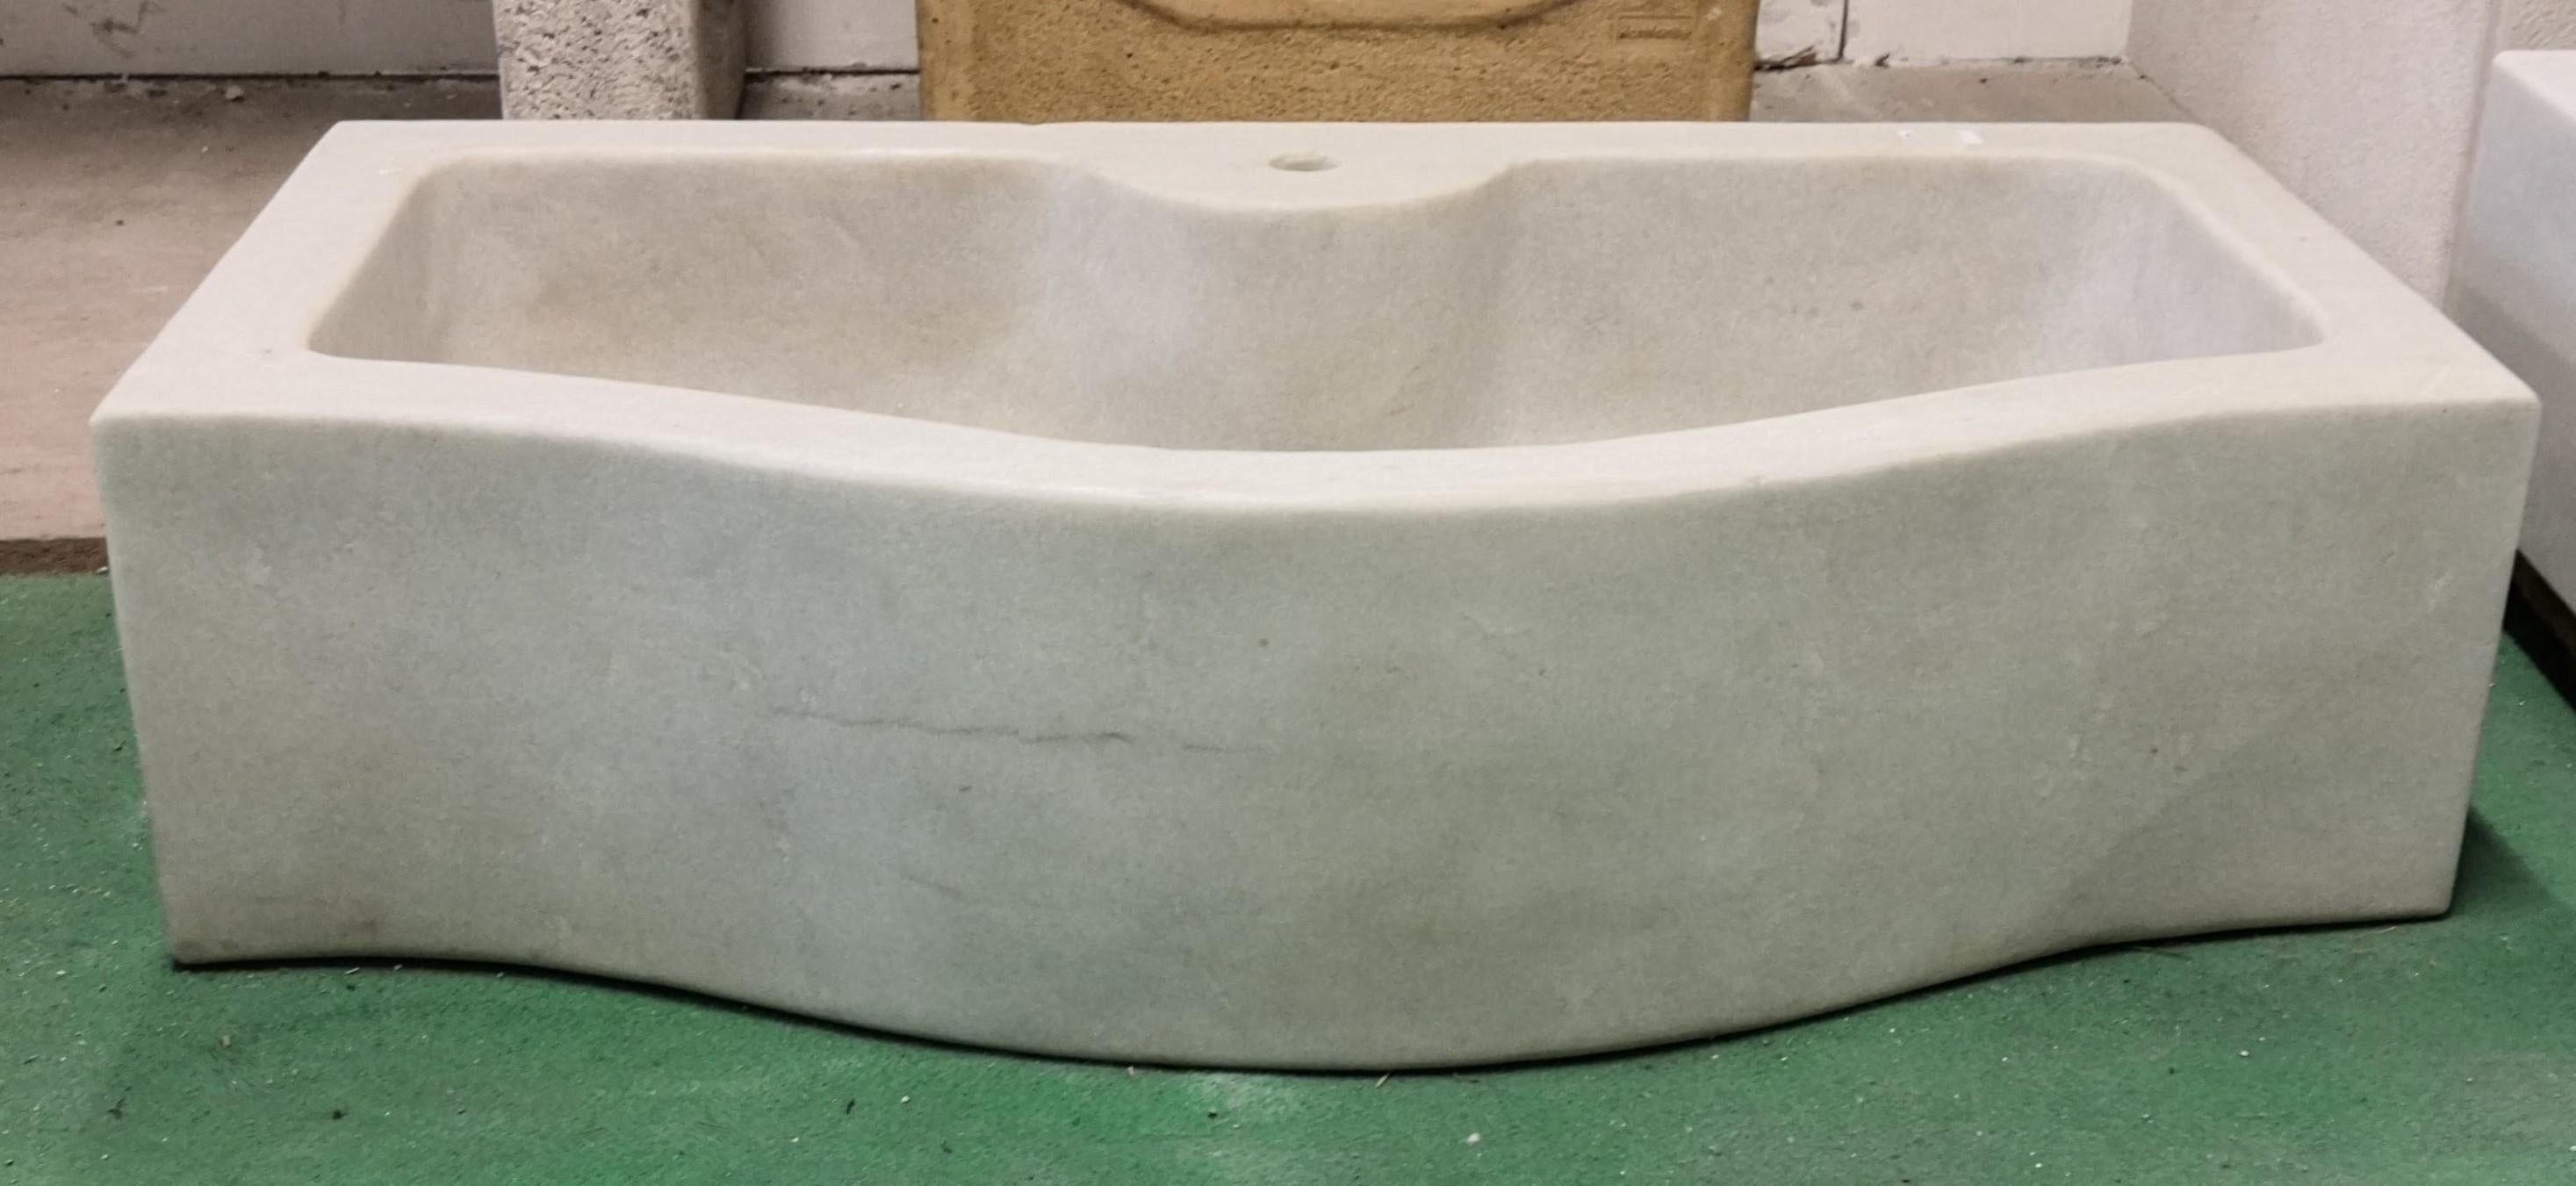 This timeless beautiful Italian classical sink is cut from one single block of white marble, these designs have not changed since Greek and Roman times, it carries superb artistic merit easily fitting in with old and new buildings.
It also makes an